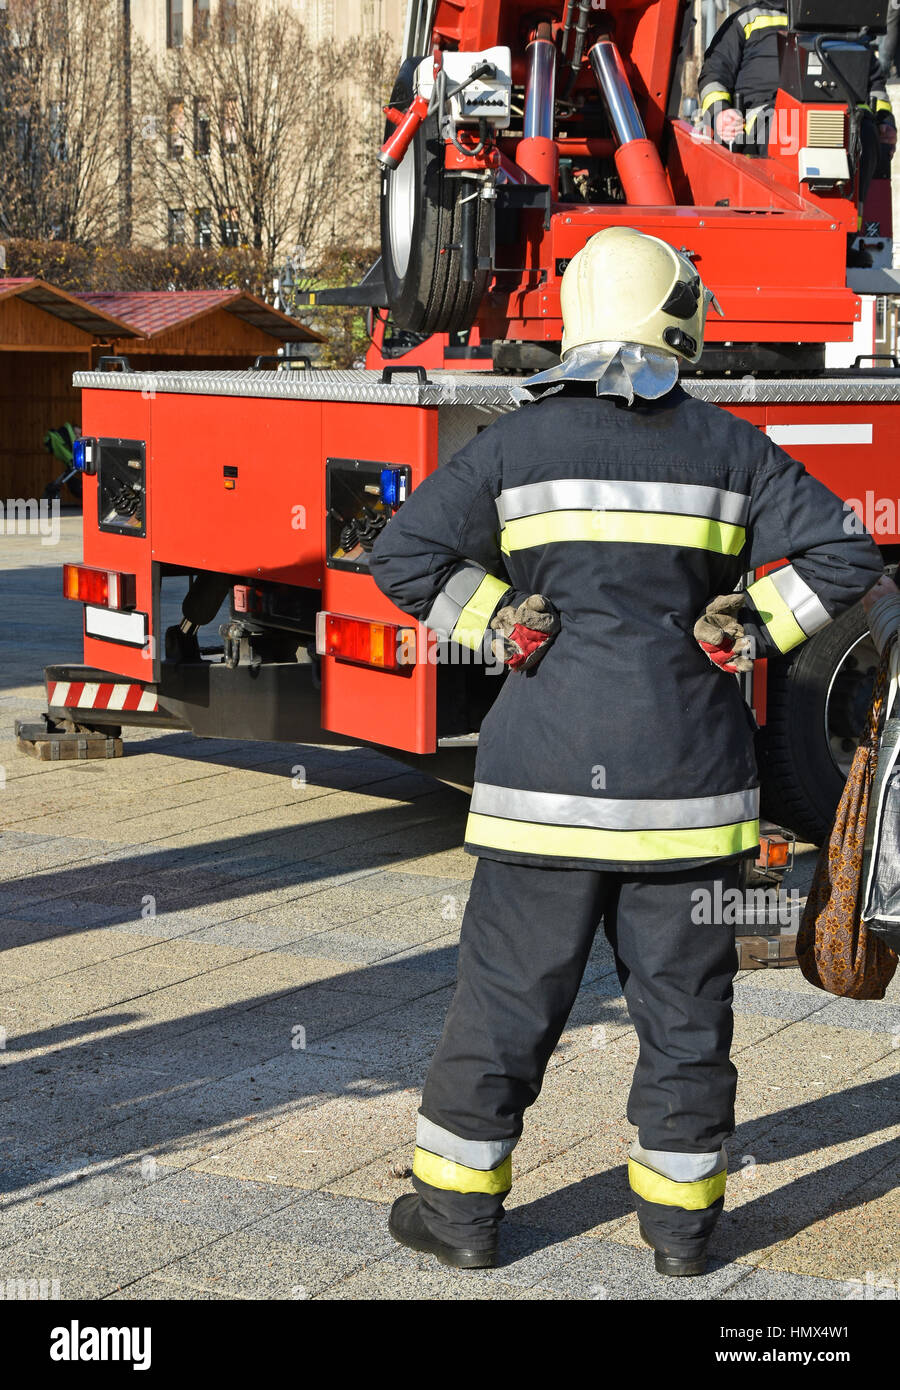 Firefighter stands next to a crane Stock Photo